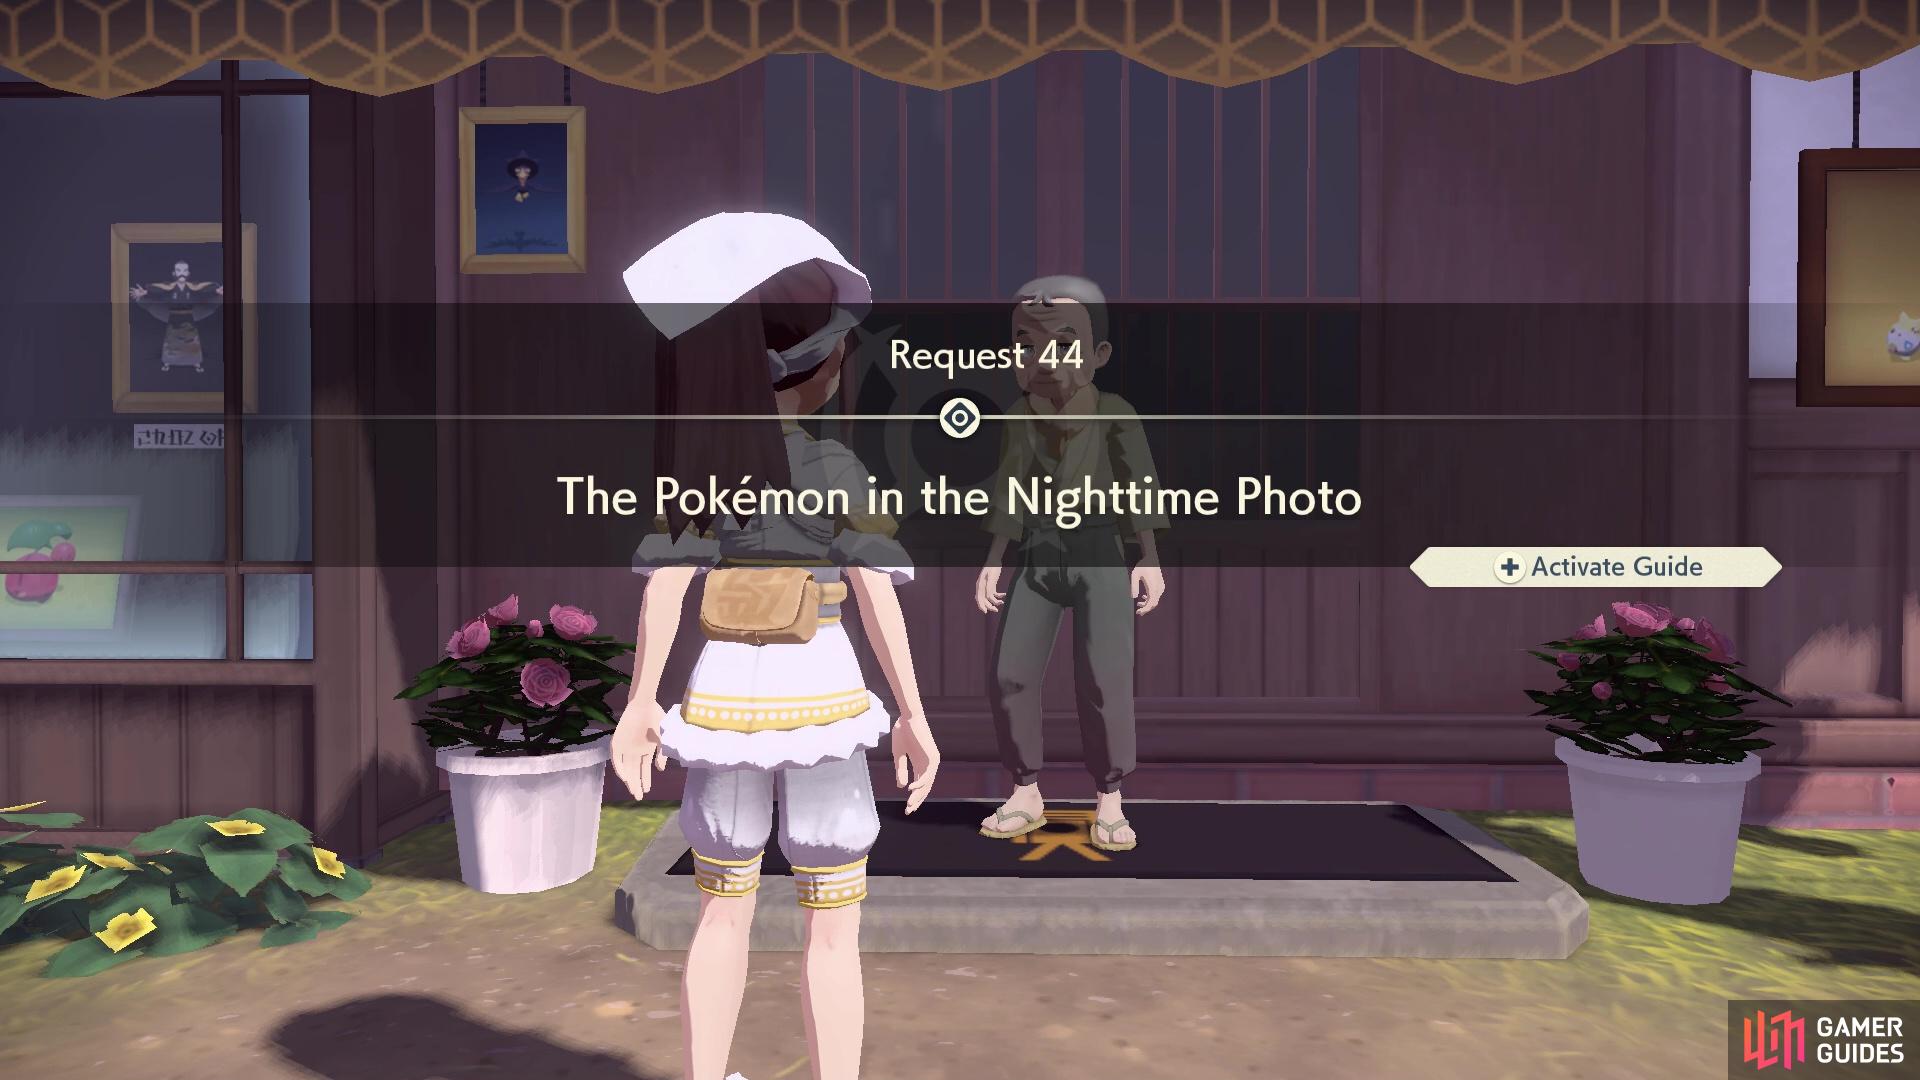 Request 44: The Pokémon in the Nighttime Photo.